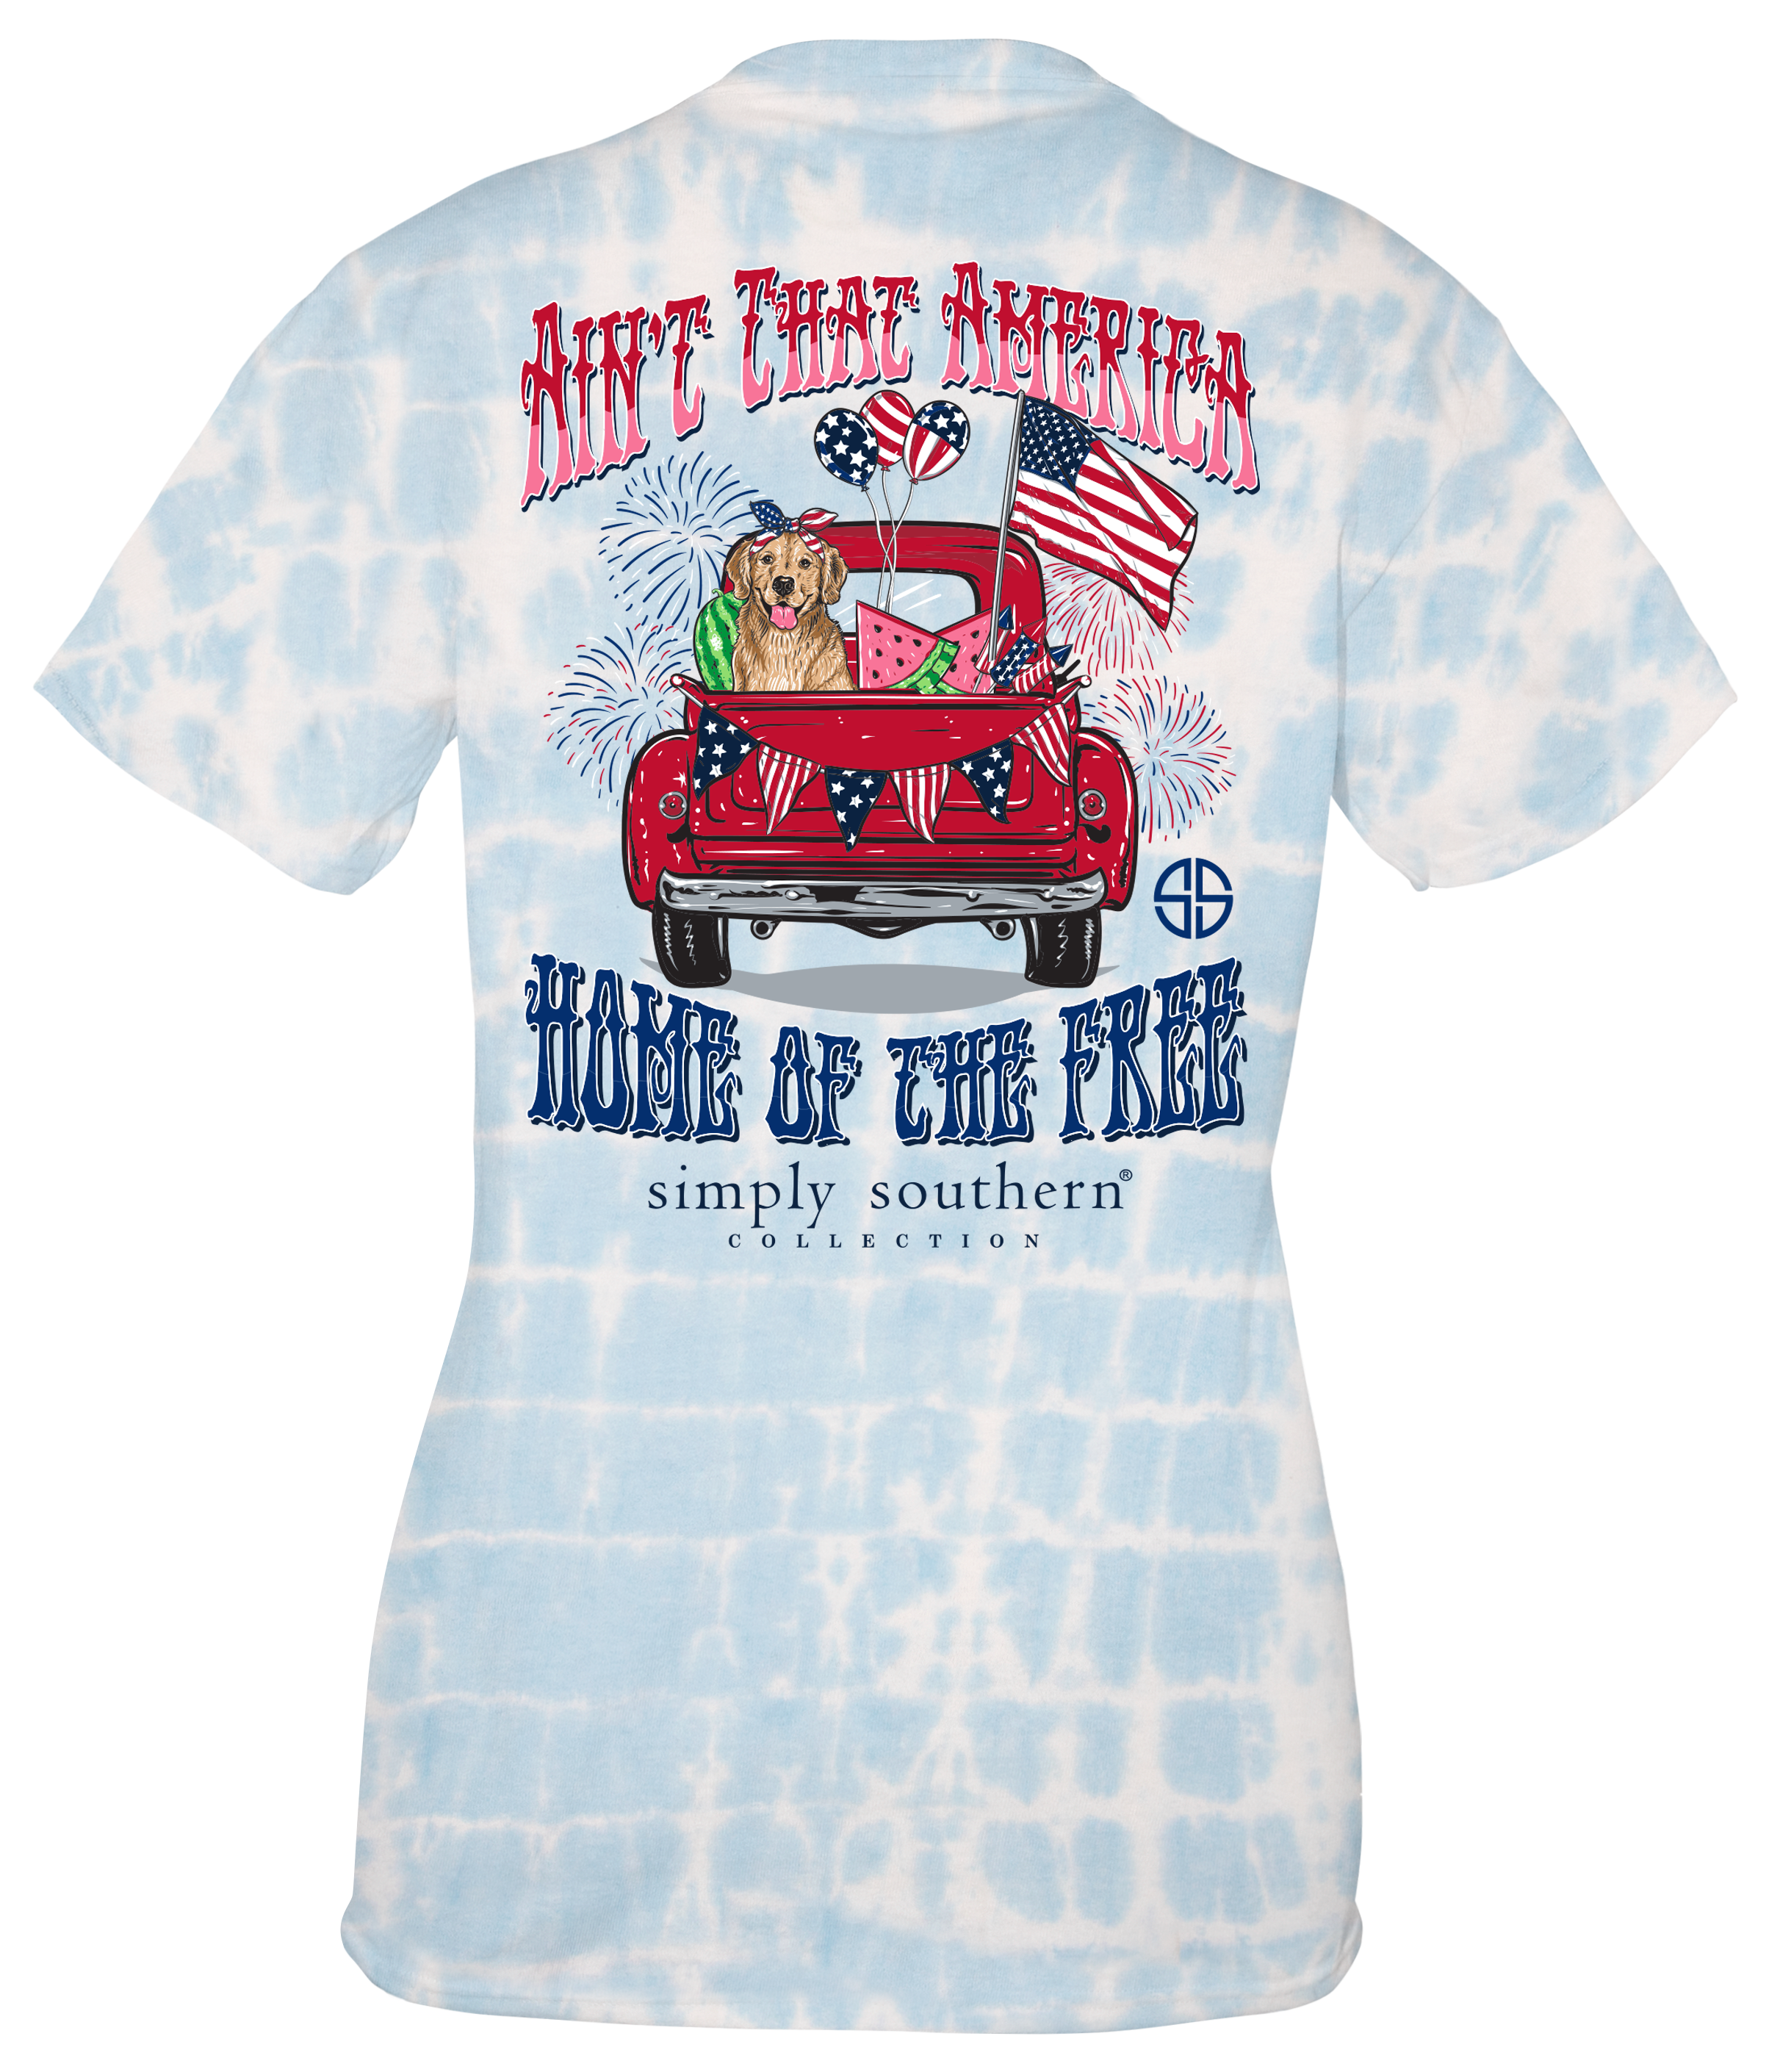 Youth 'Aint That America' Tie Dye Short Sleeve Tee by Simply Southern